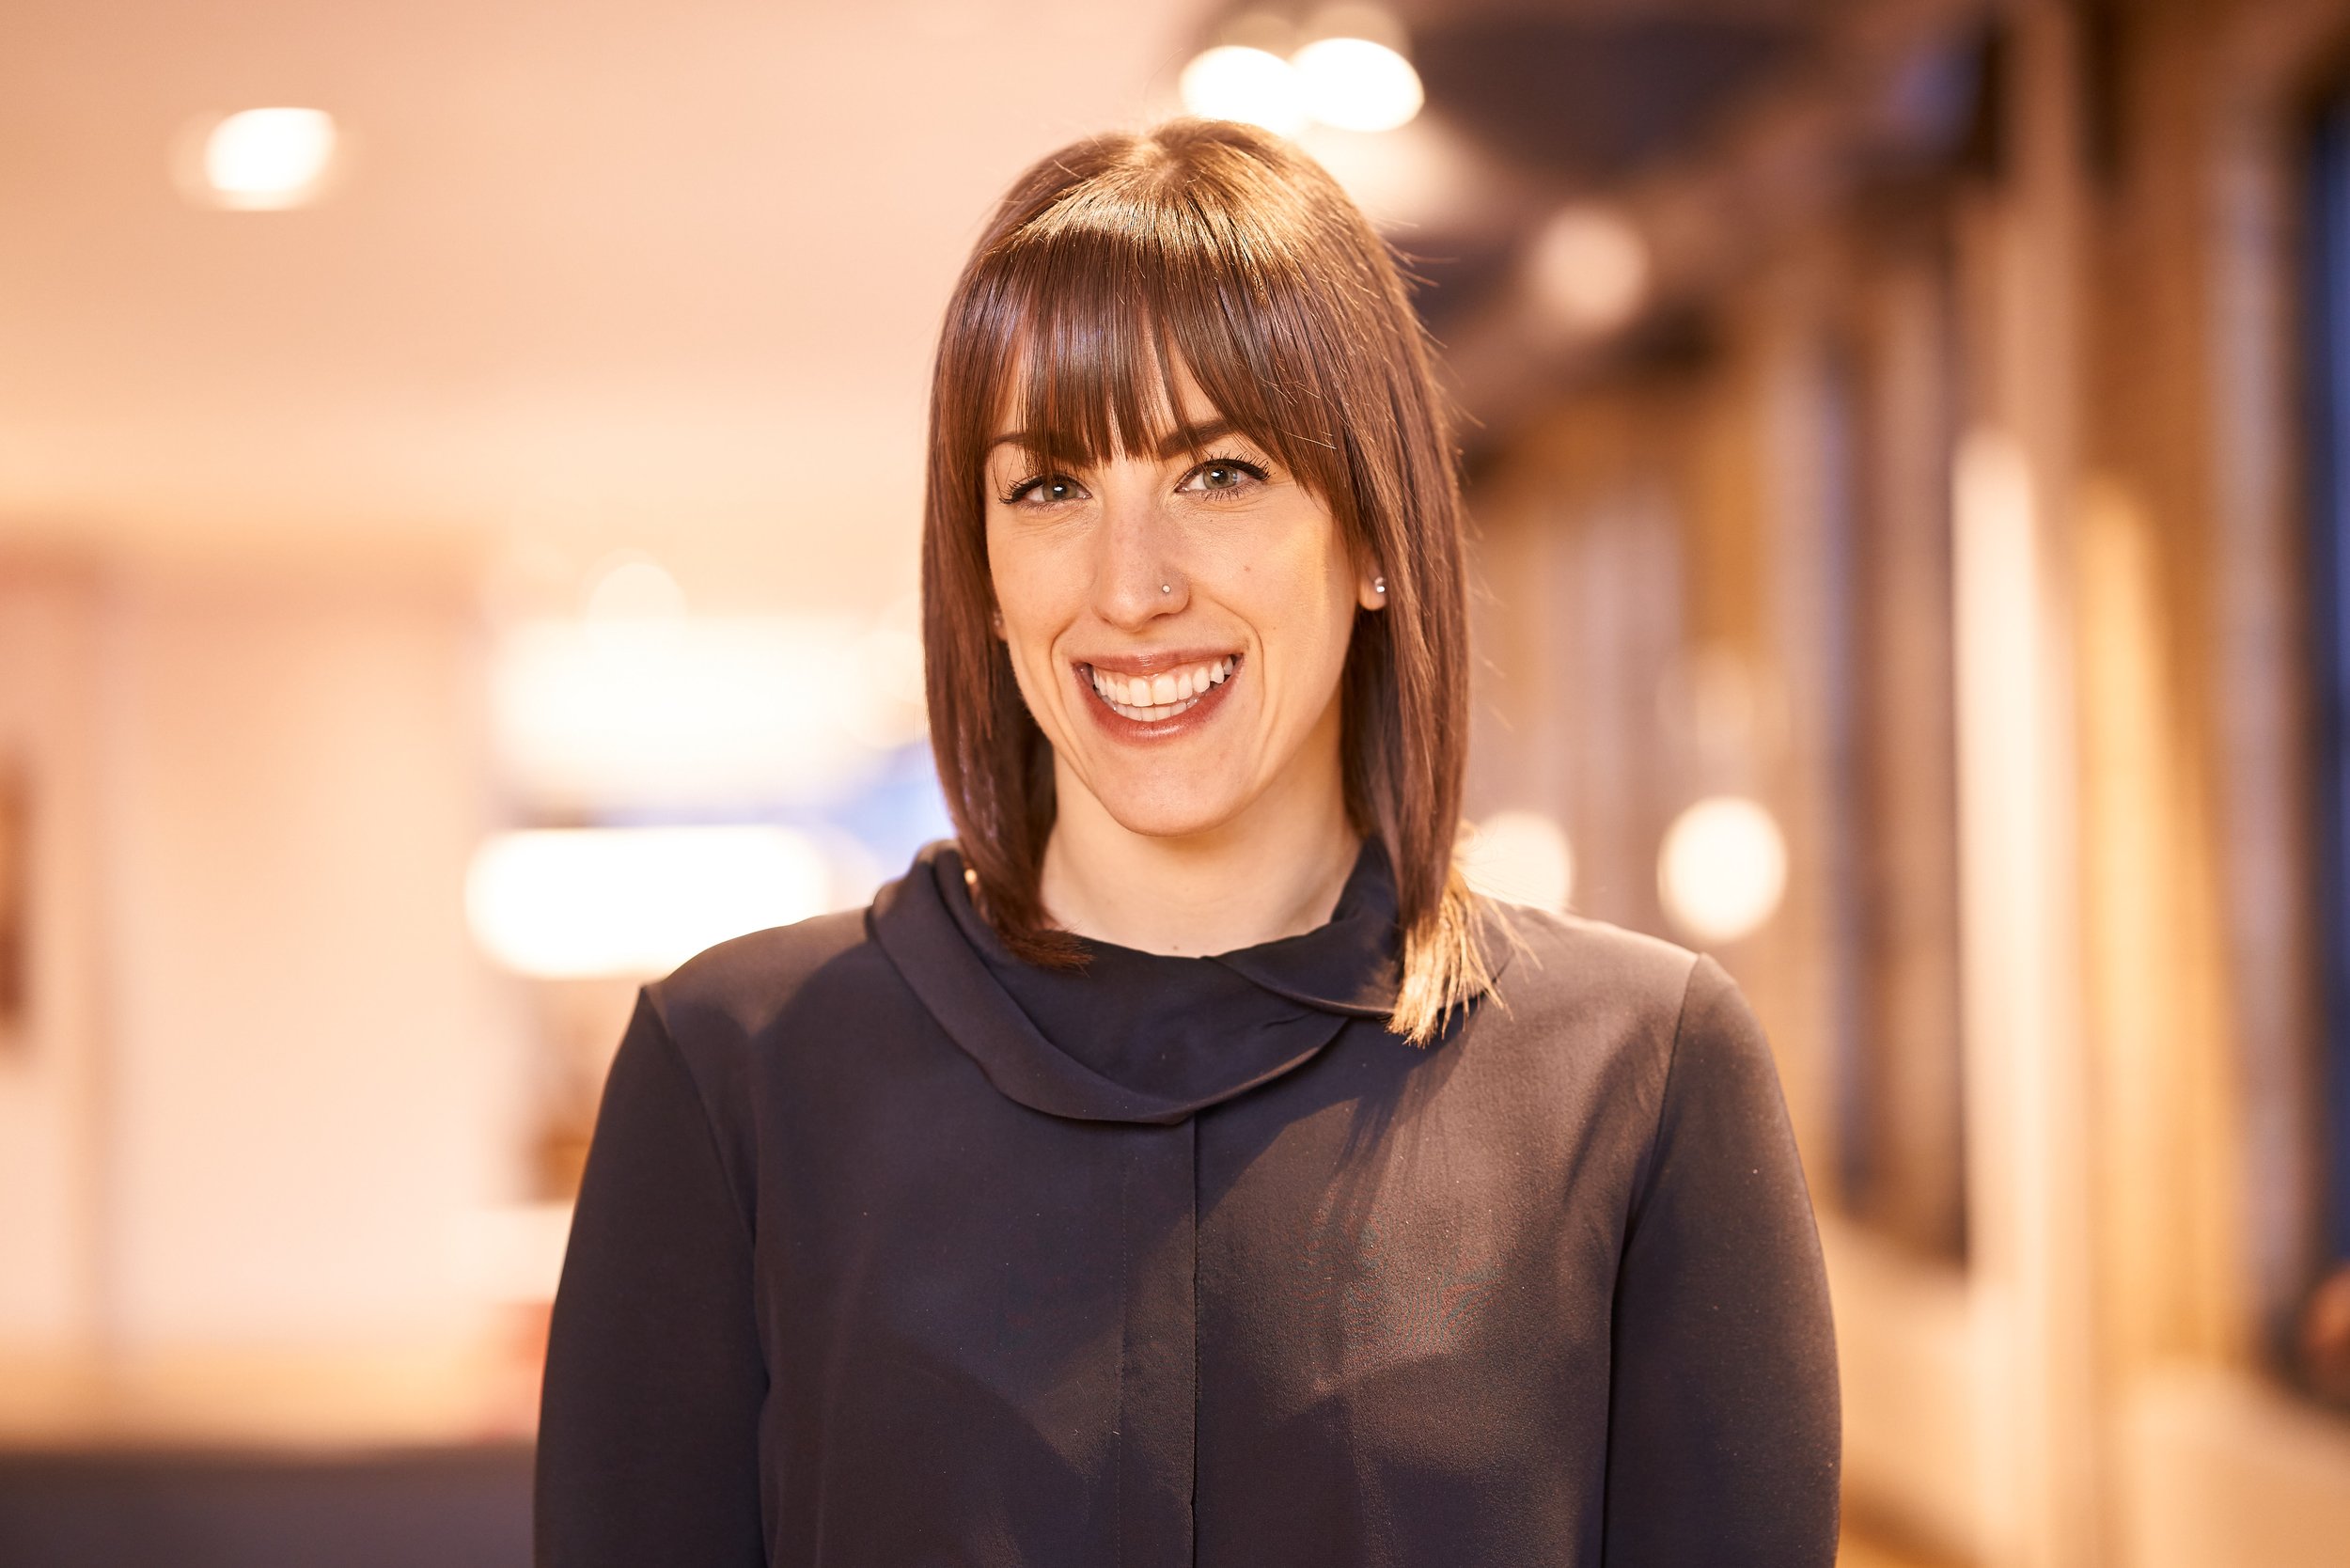 Publicis Toronto appoints Jessica Balter as Chief Marketing Officer